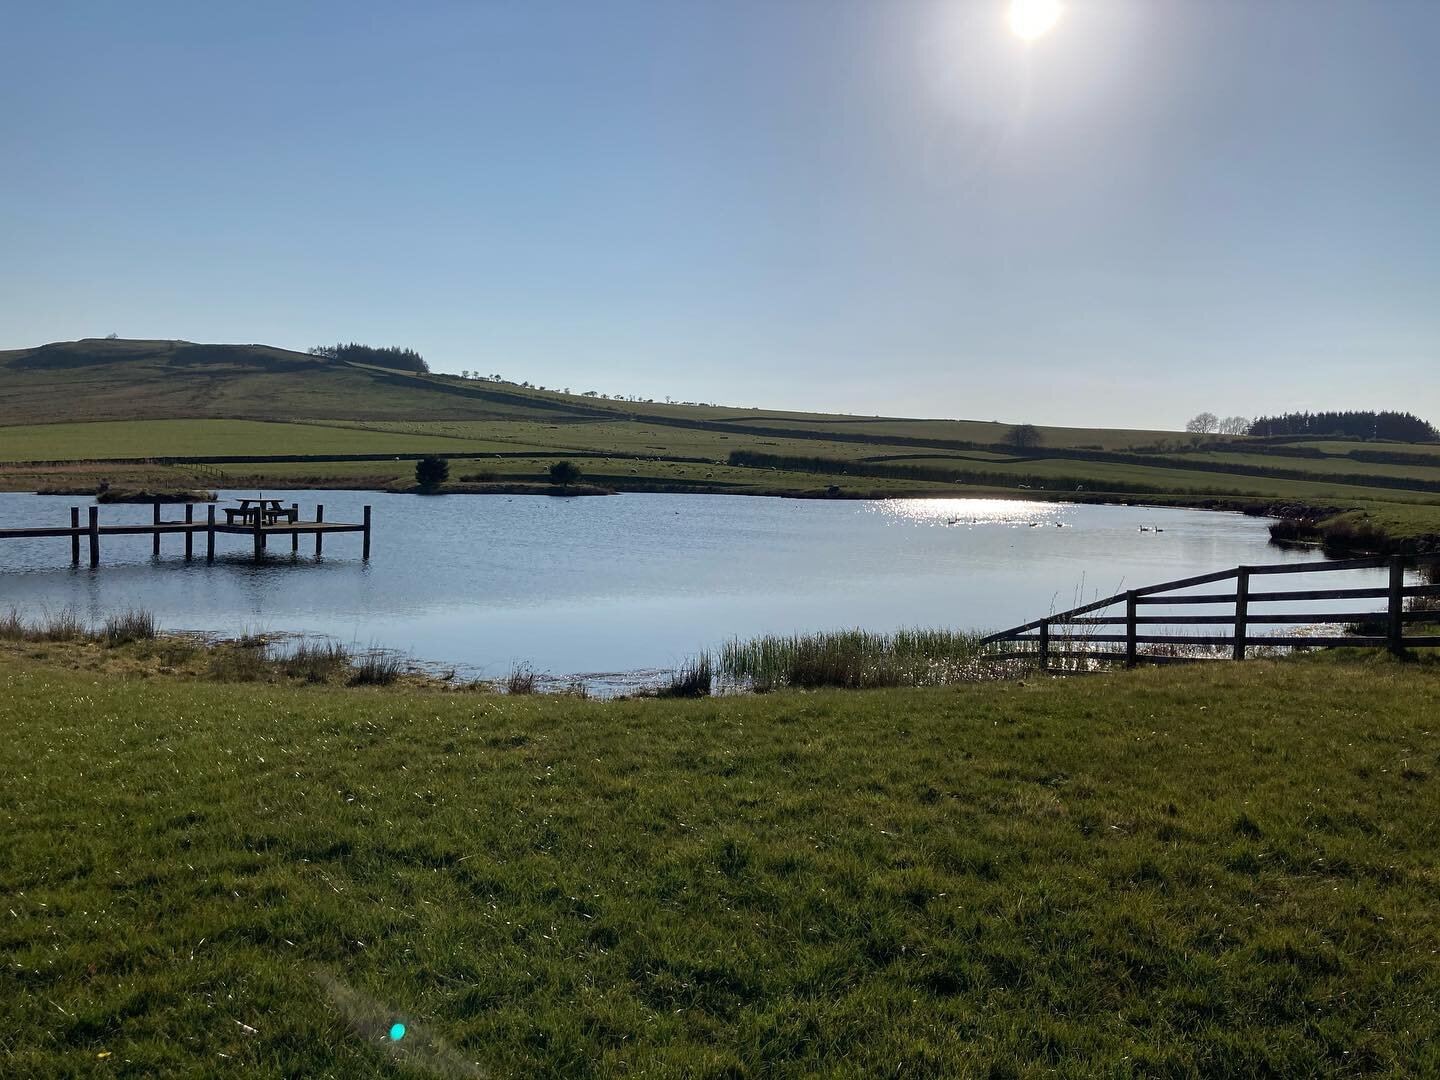 Stunning evening at the lake. We are offering a private pop up campsite for family / friendly groups this summer, fancy waking up to this view? Drop us a message to enquire...